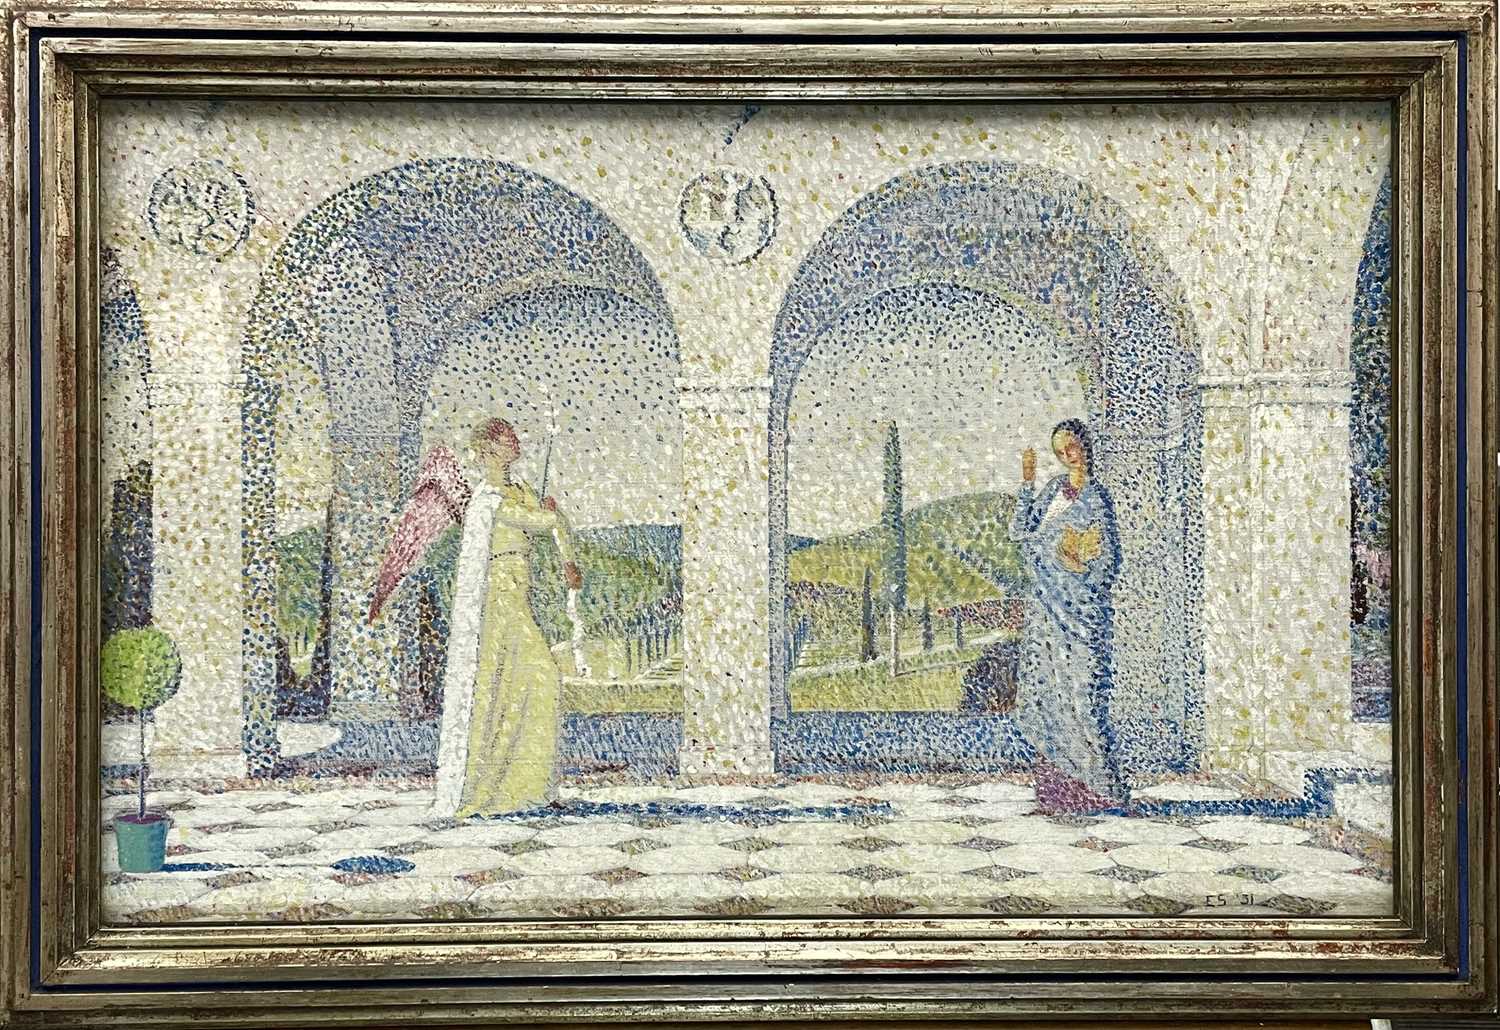 Neo-Impressionist Pointillism The Annunciation Oil on canvas Initialed E S and dated '31 - Image 2 of 7